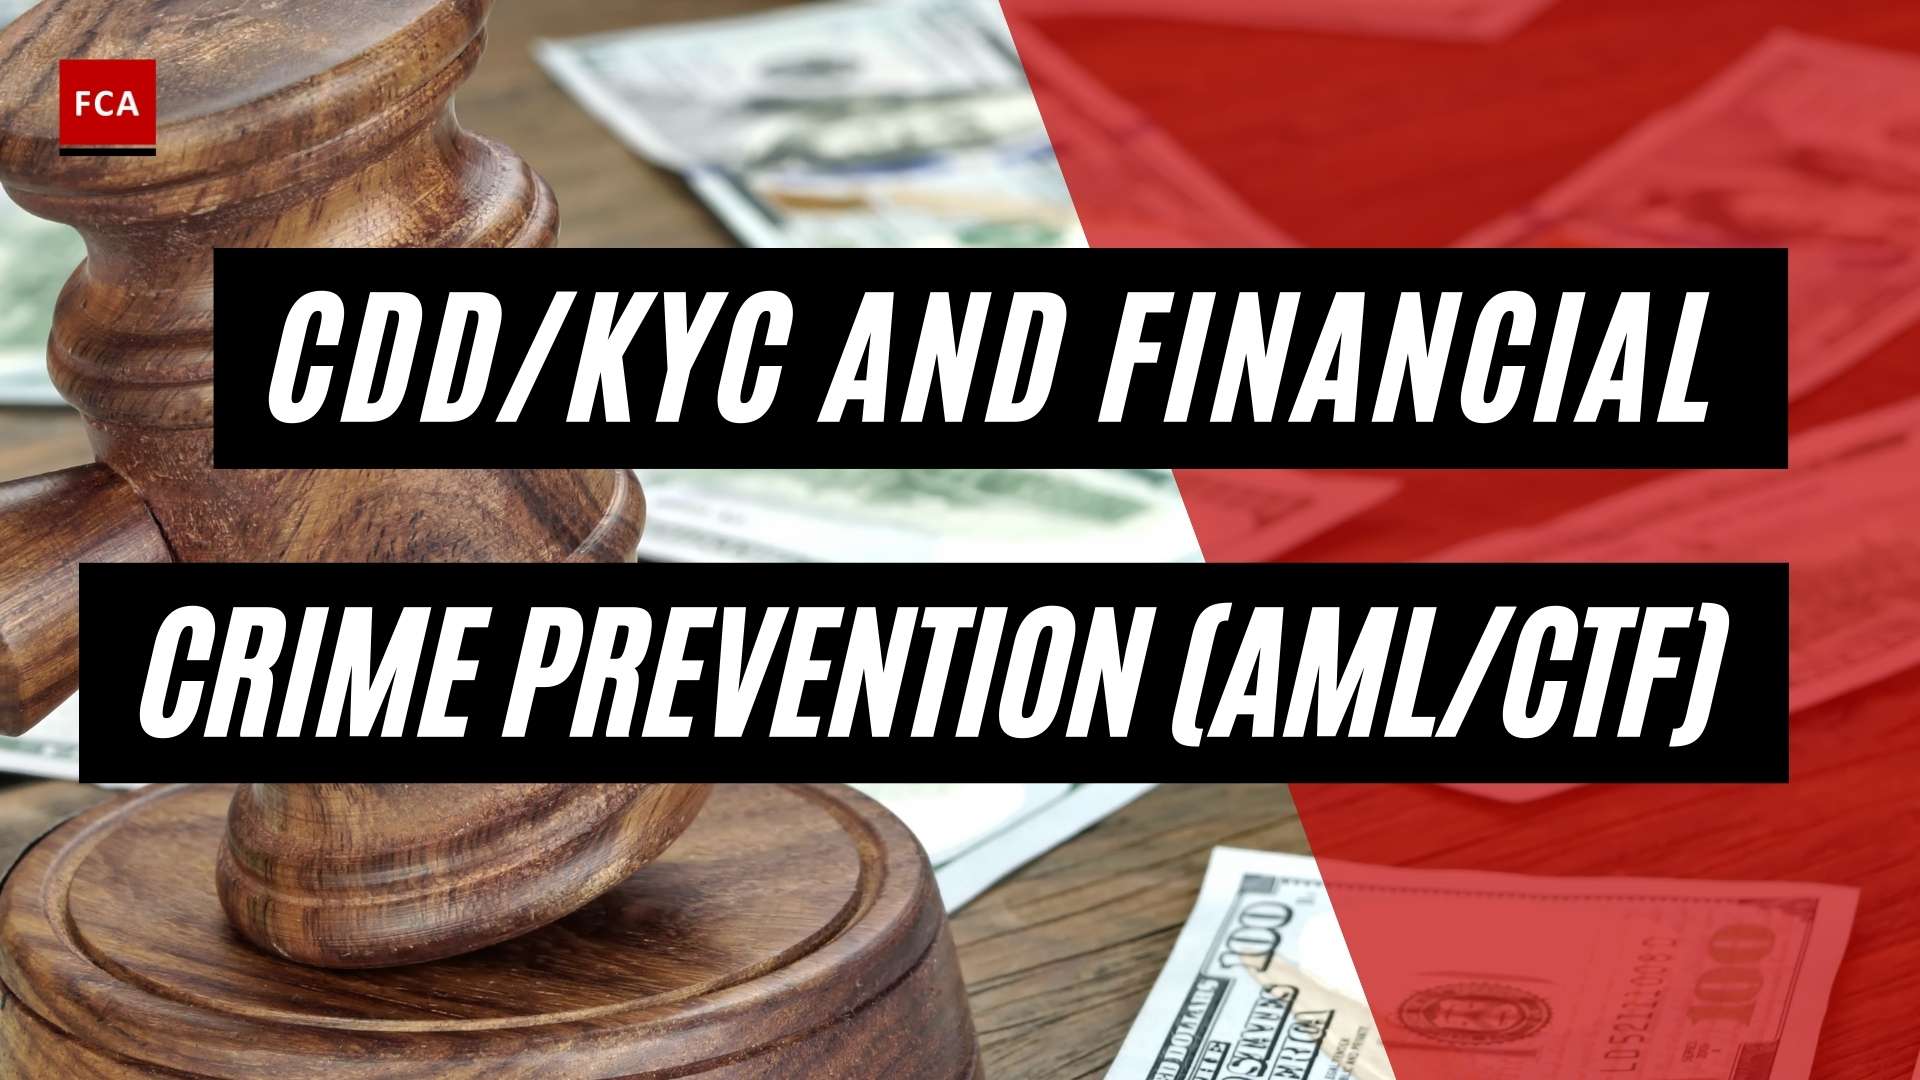 Cdd/Kyc And Financial Crime Prevention (Aml/Ctf) - Featured Image